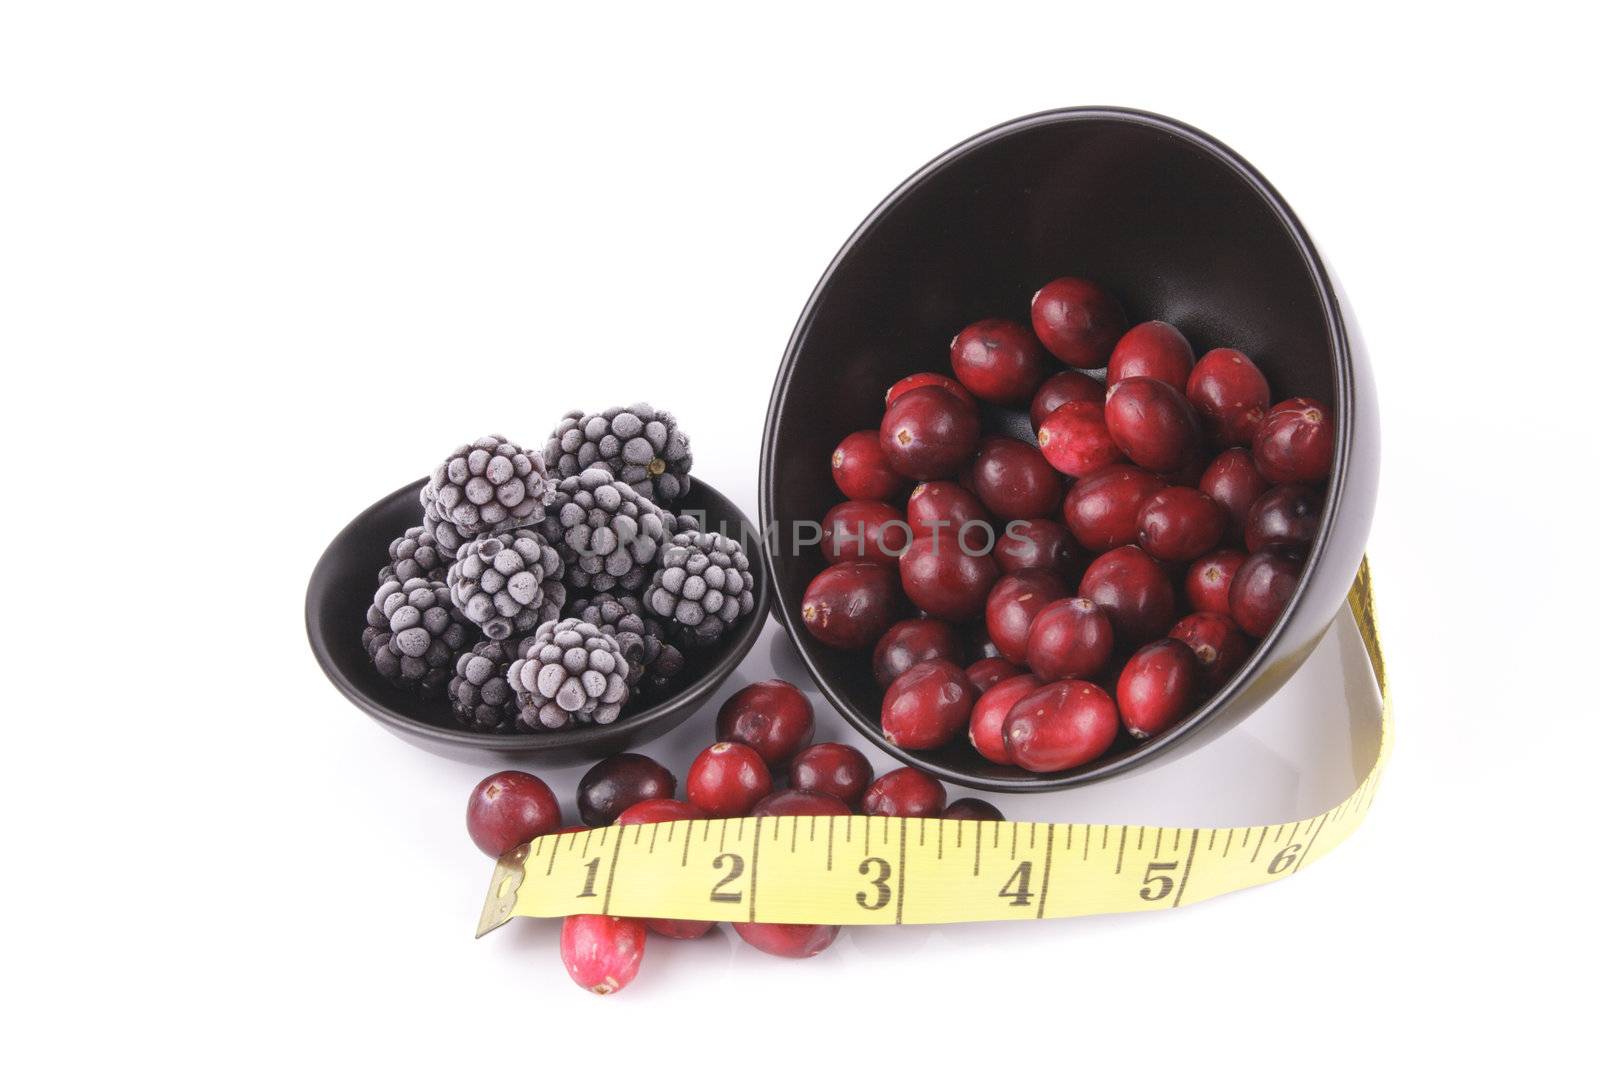 Red ripe cranberries spilling out of a small round black bowl on its side with a tape measure and frozen blackberries on a reflective white background